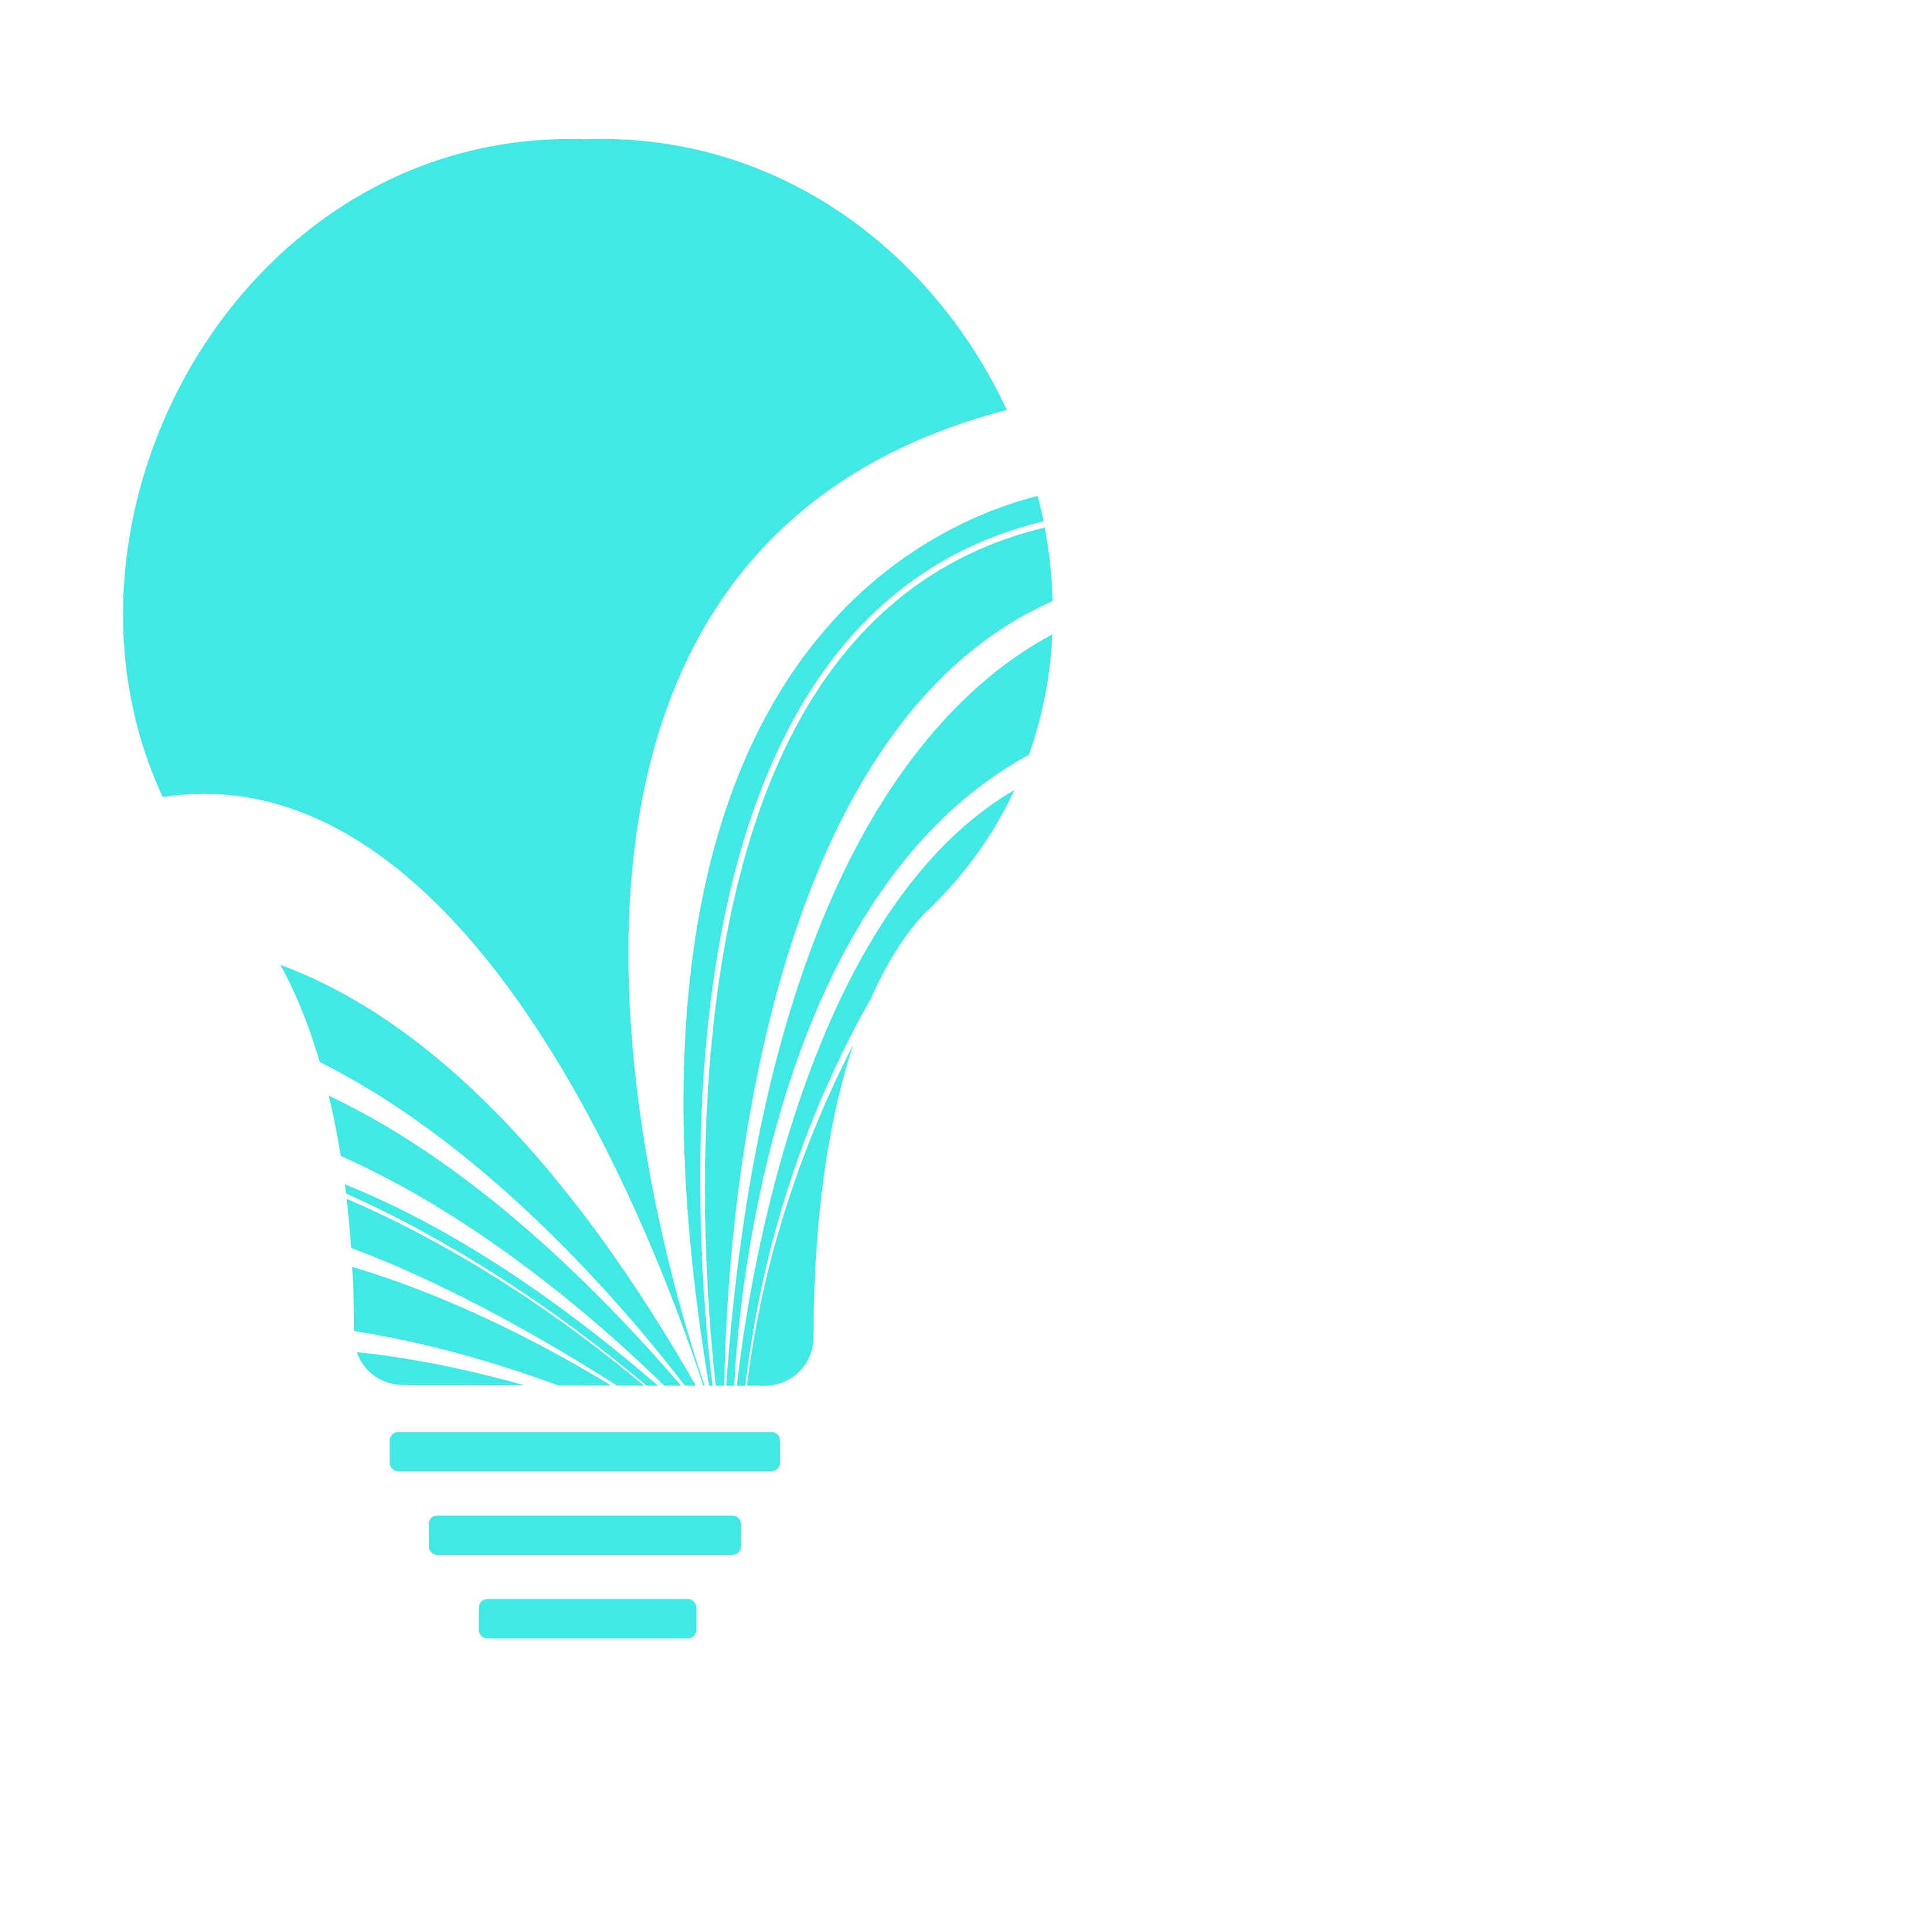 Rampart Library District